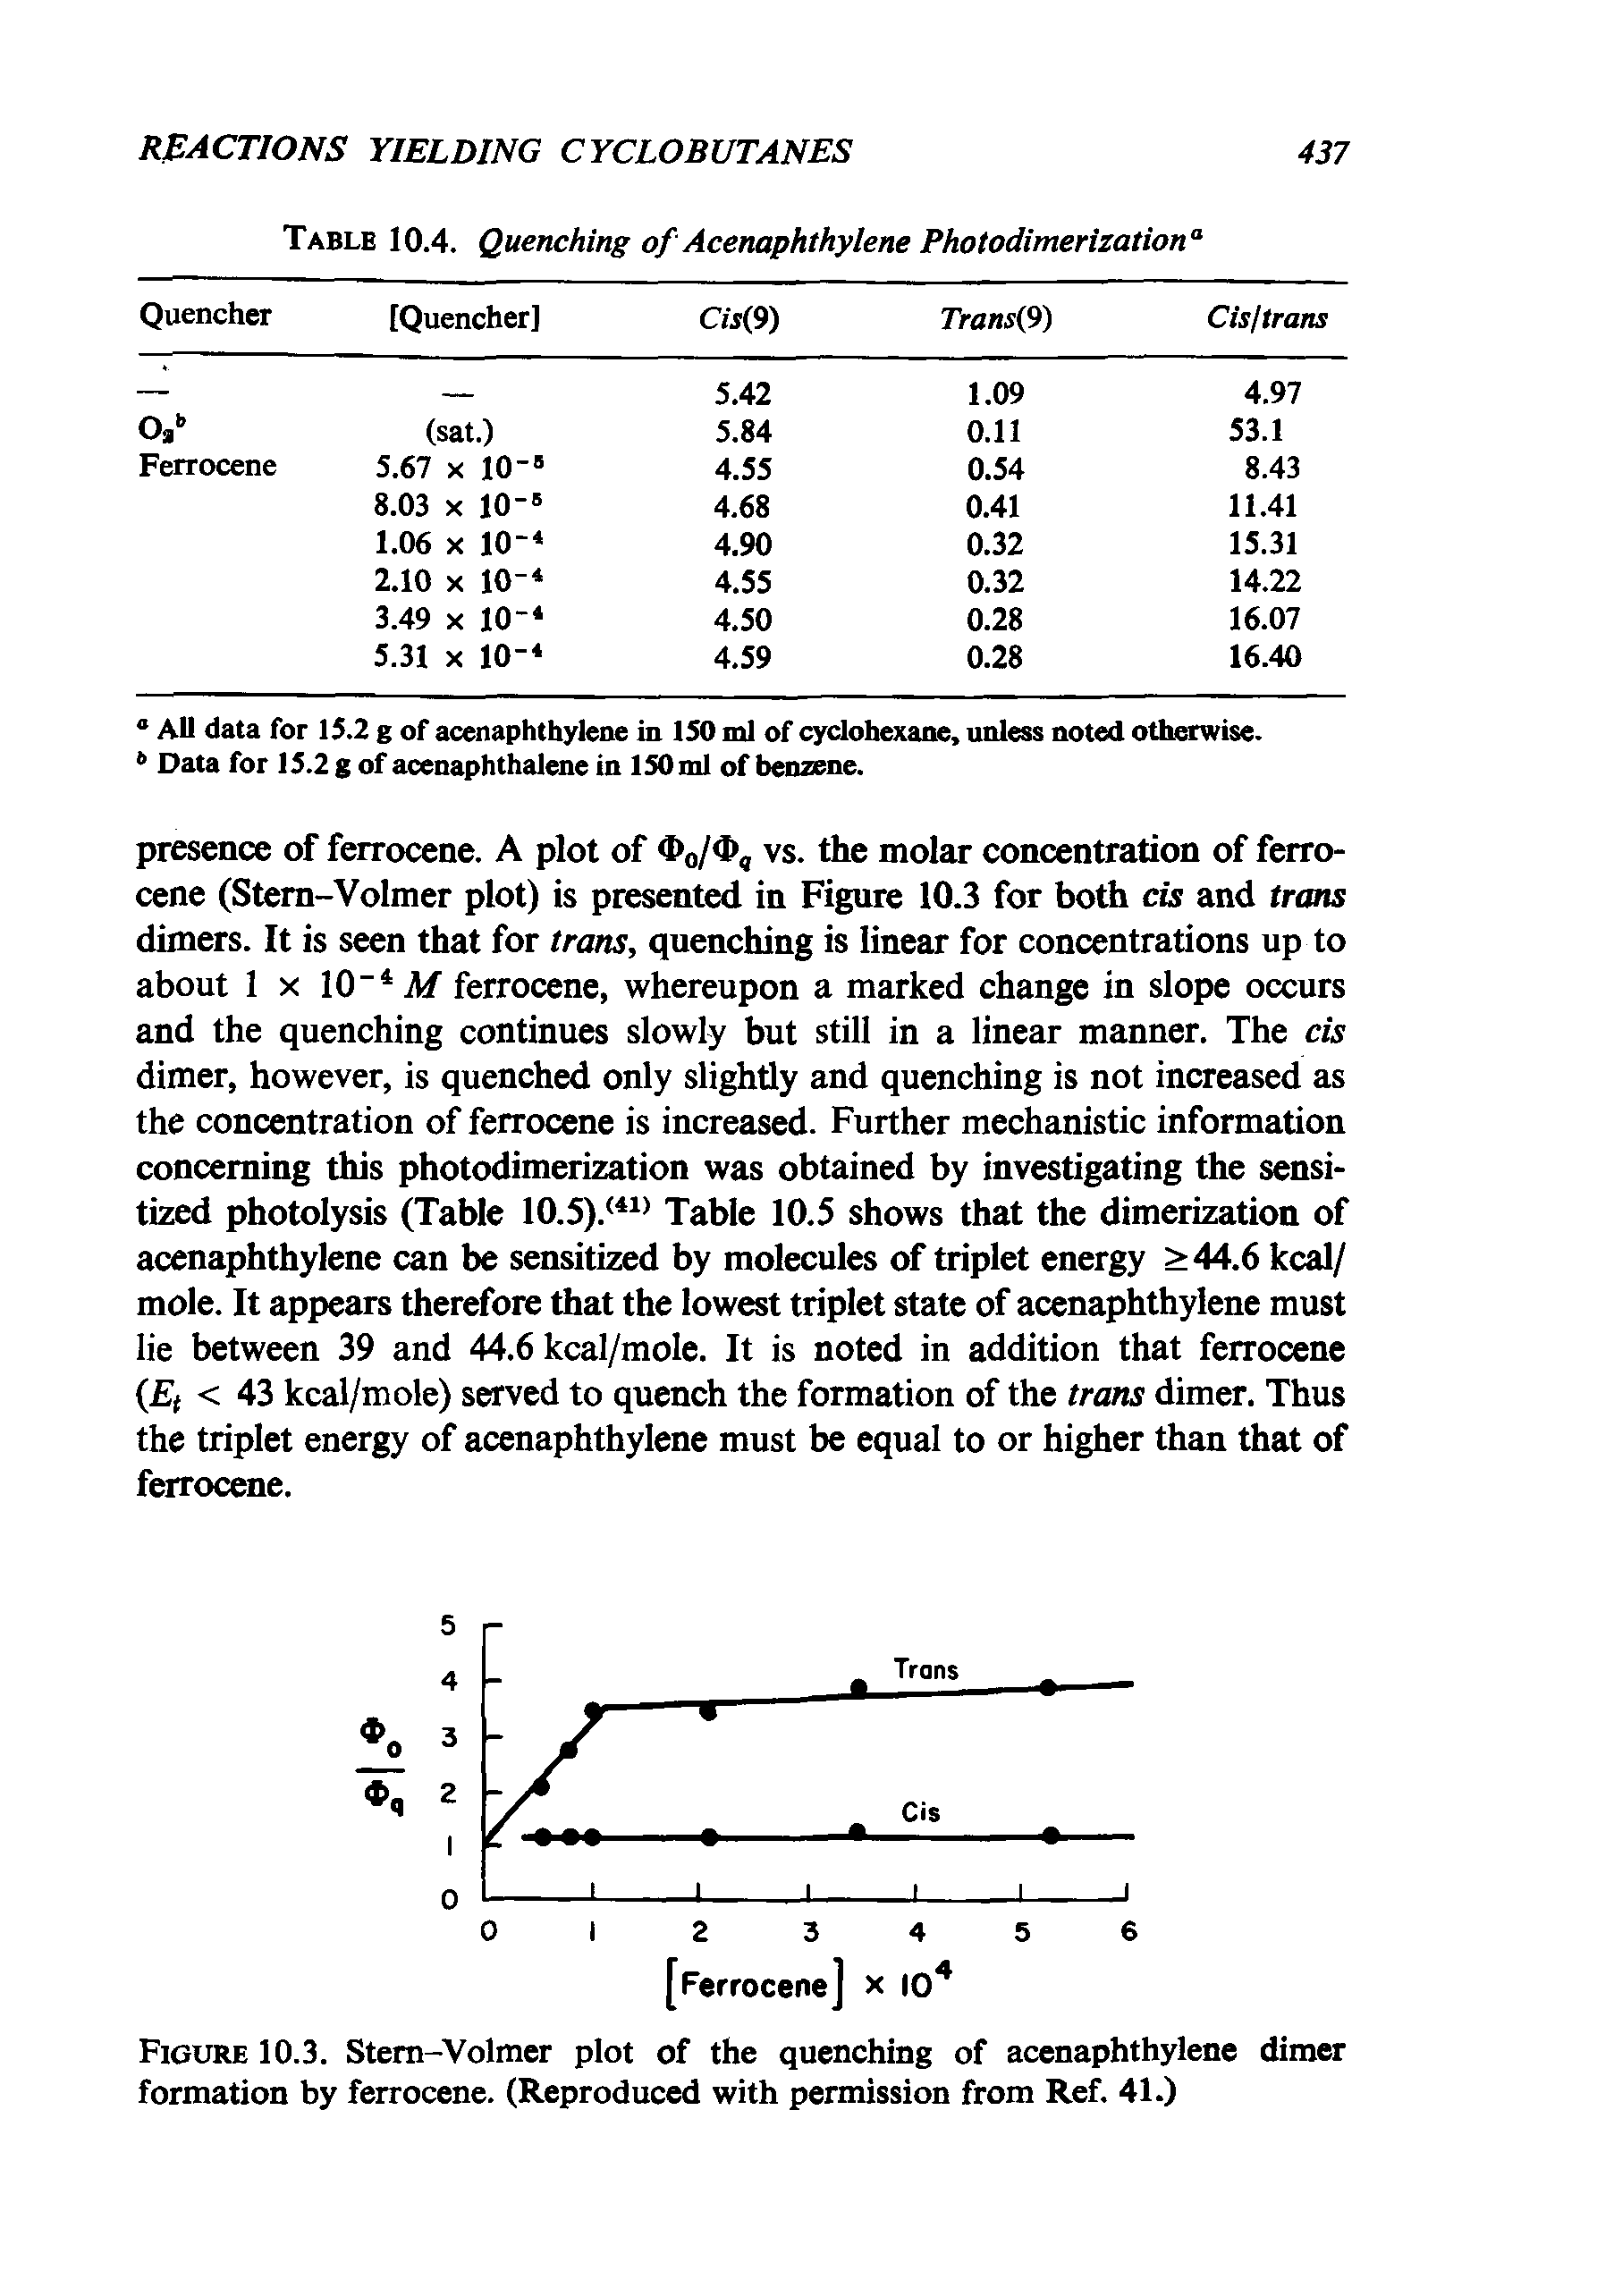 Figure 10.3. Stem-Volmer plot of the quenching of acenaphthylene dimer formation by ferrocene. (Reproduced with permission from Ref. 41.)...